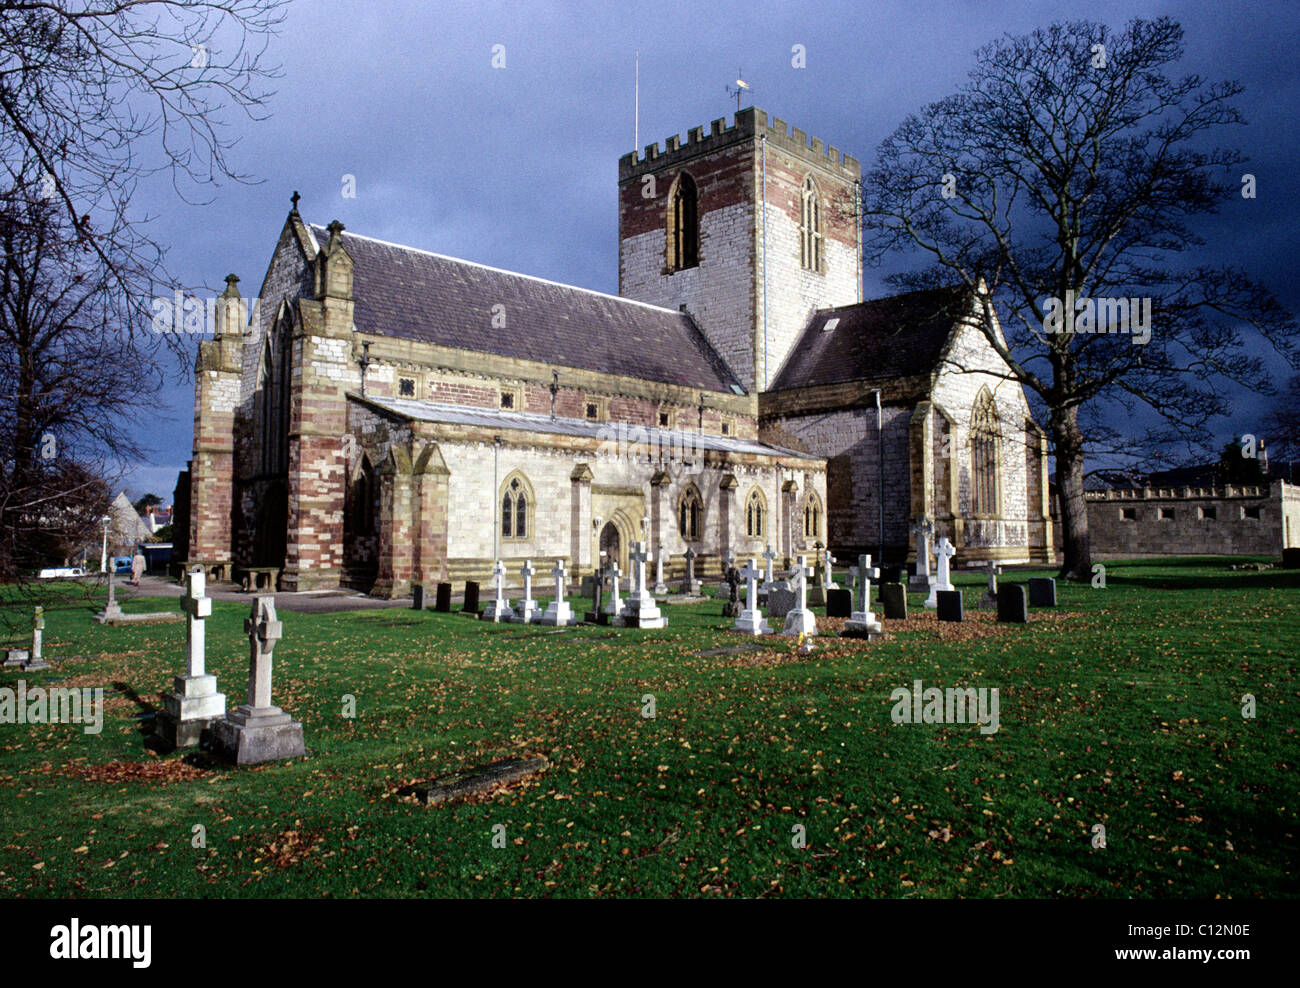 St. Asaph Cathedral, Clwyd, Wales Welsh cathedrals UK Stock Photo